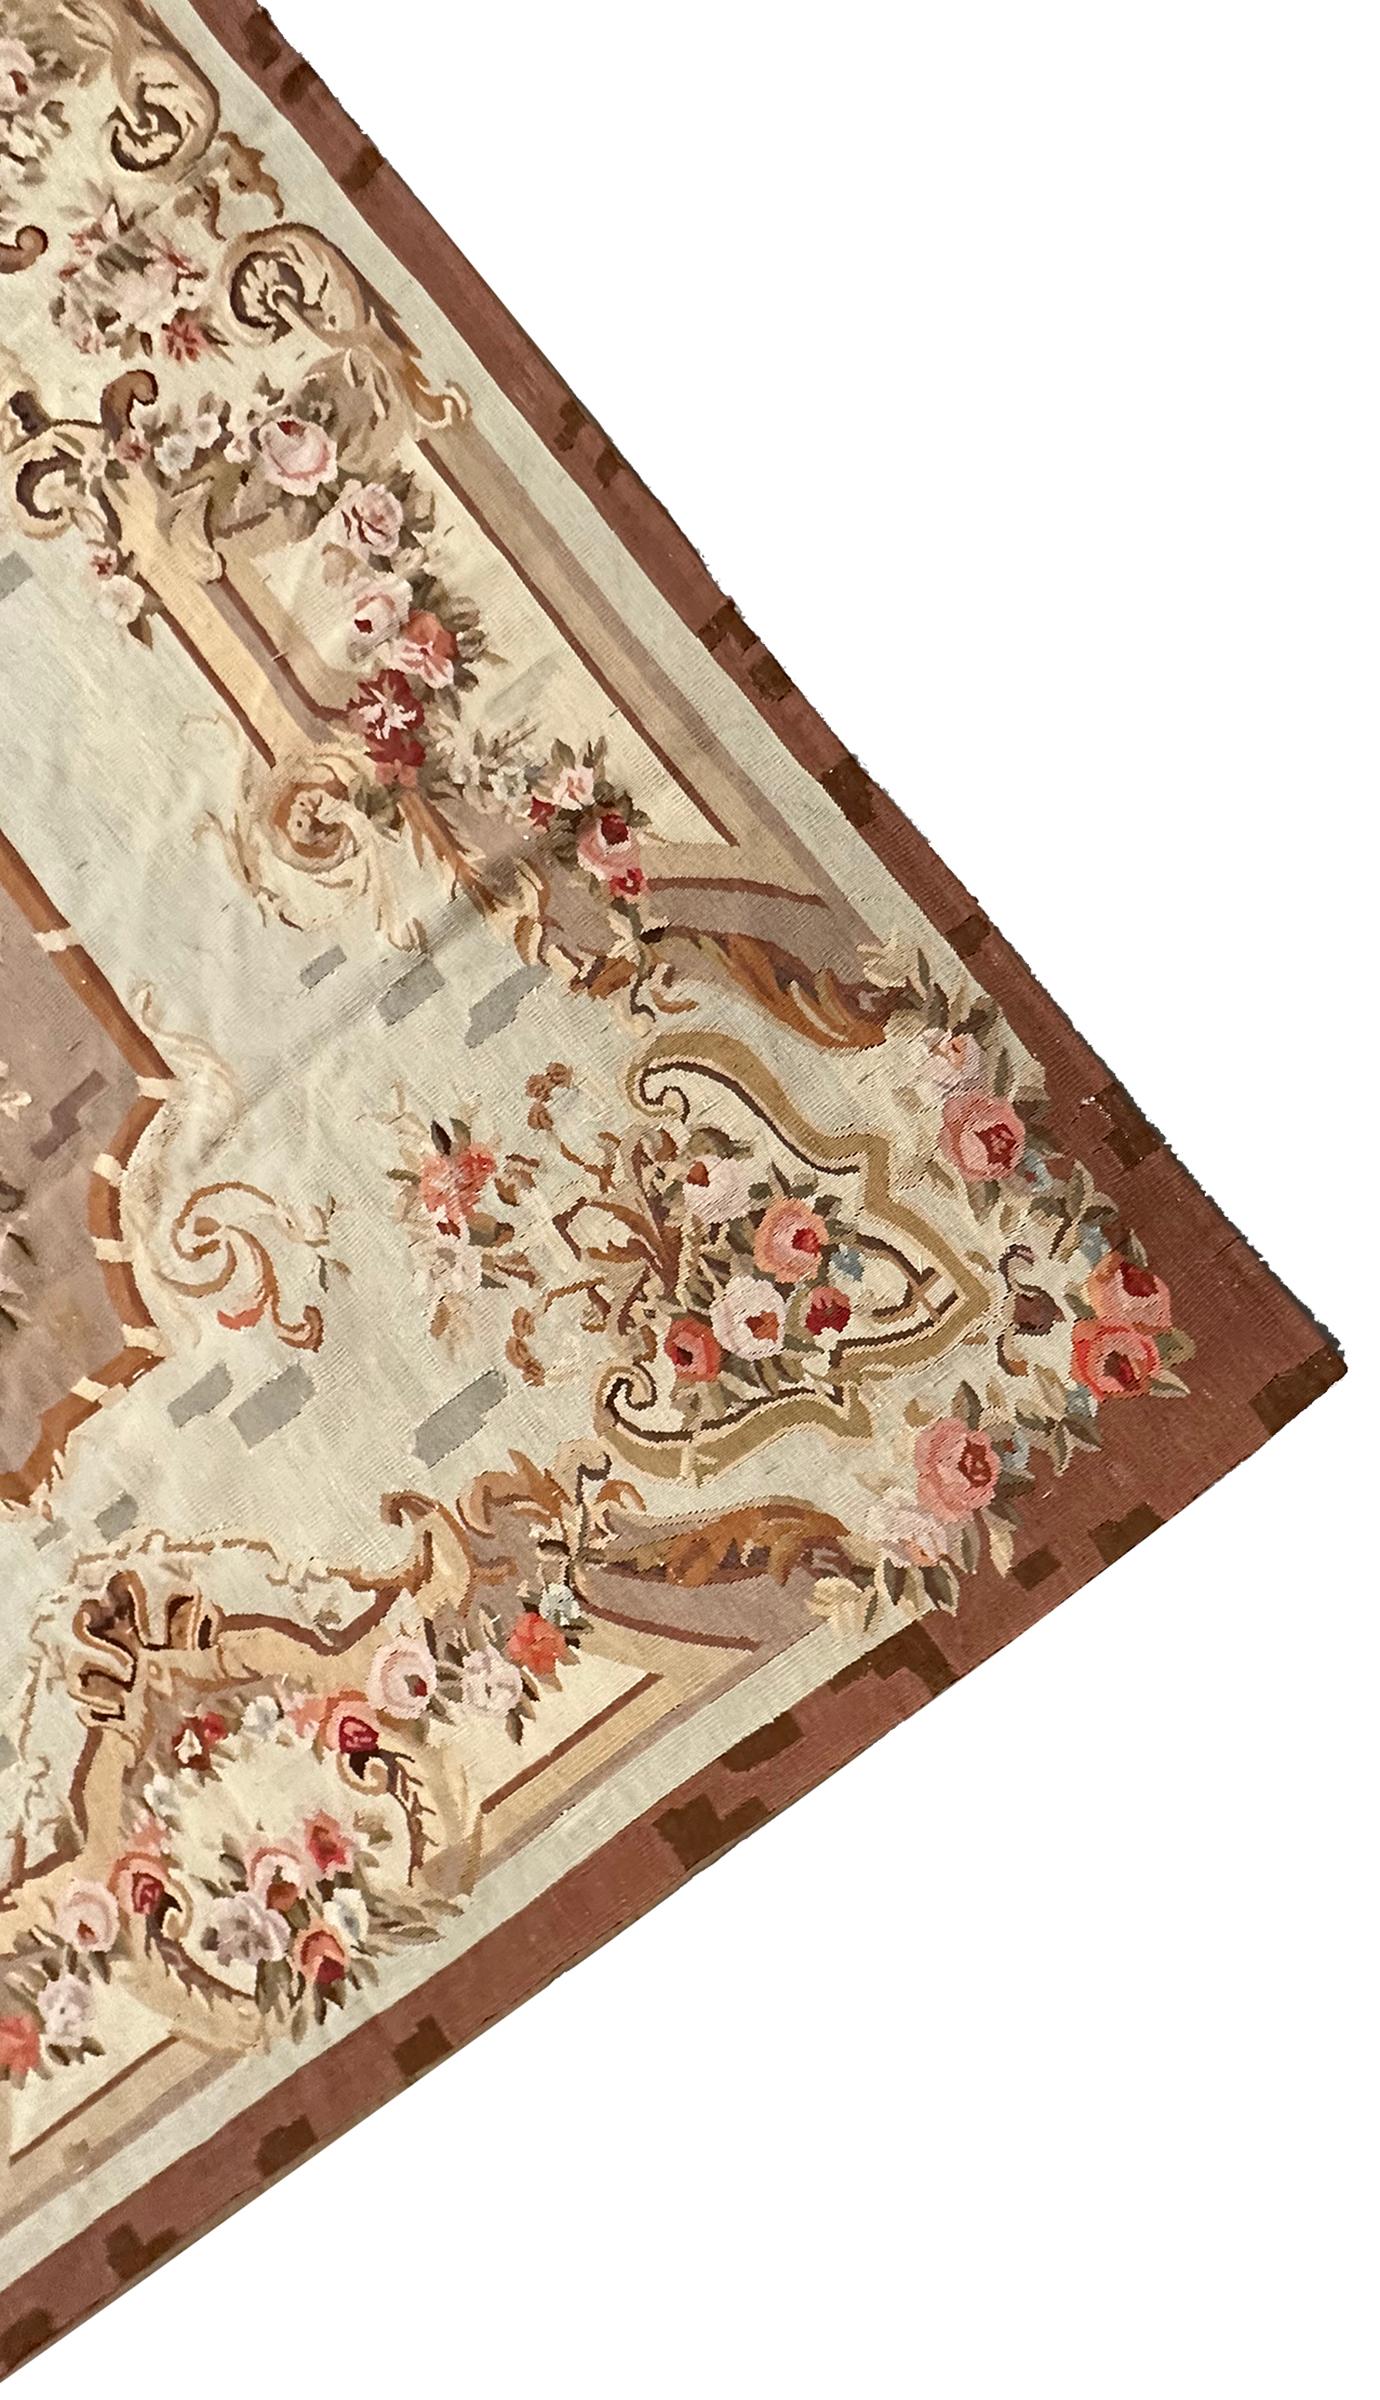 Late 19th Century Antique French Aubusson Rug Hand Woven 1880 6x7ft Rare Design 178cm x 206cm For Sale